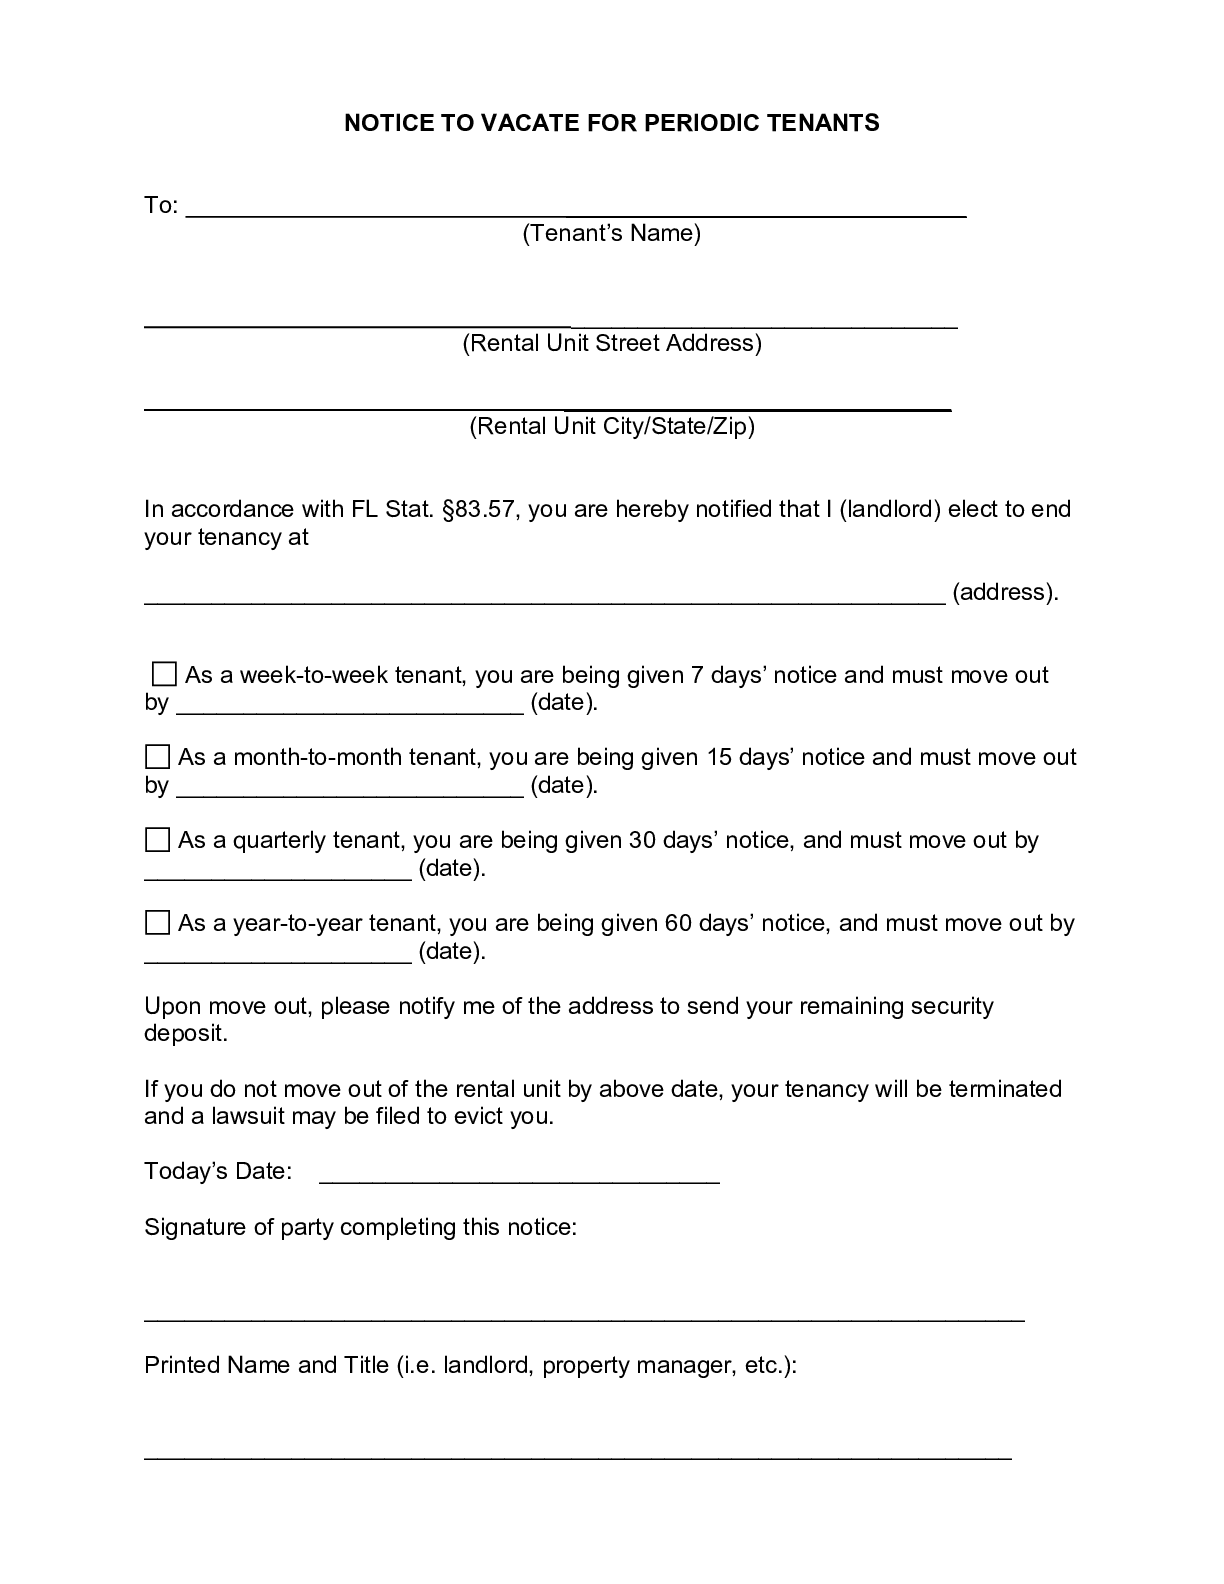 Lease Violation Notice Template from ipropertymanagement.com